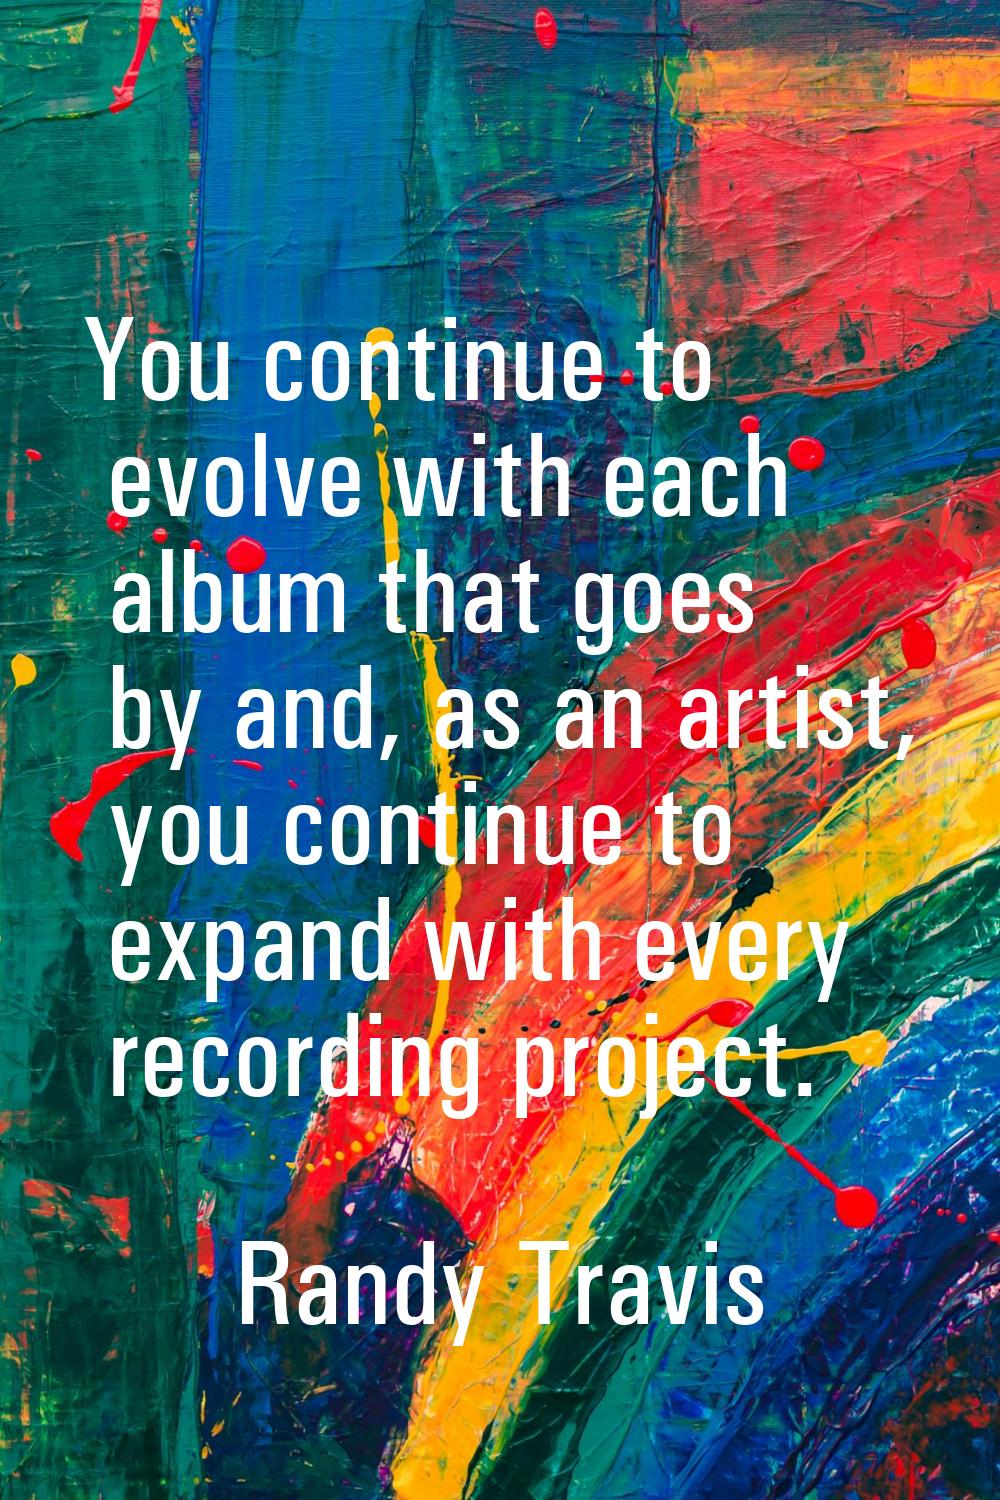 You continue to evolve with each album that goes by and, as an artist, you continue to expand with 